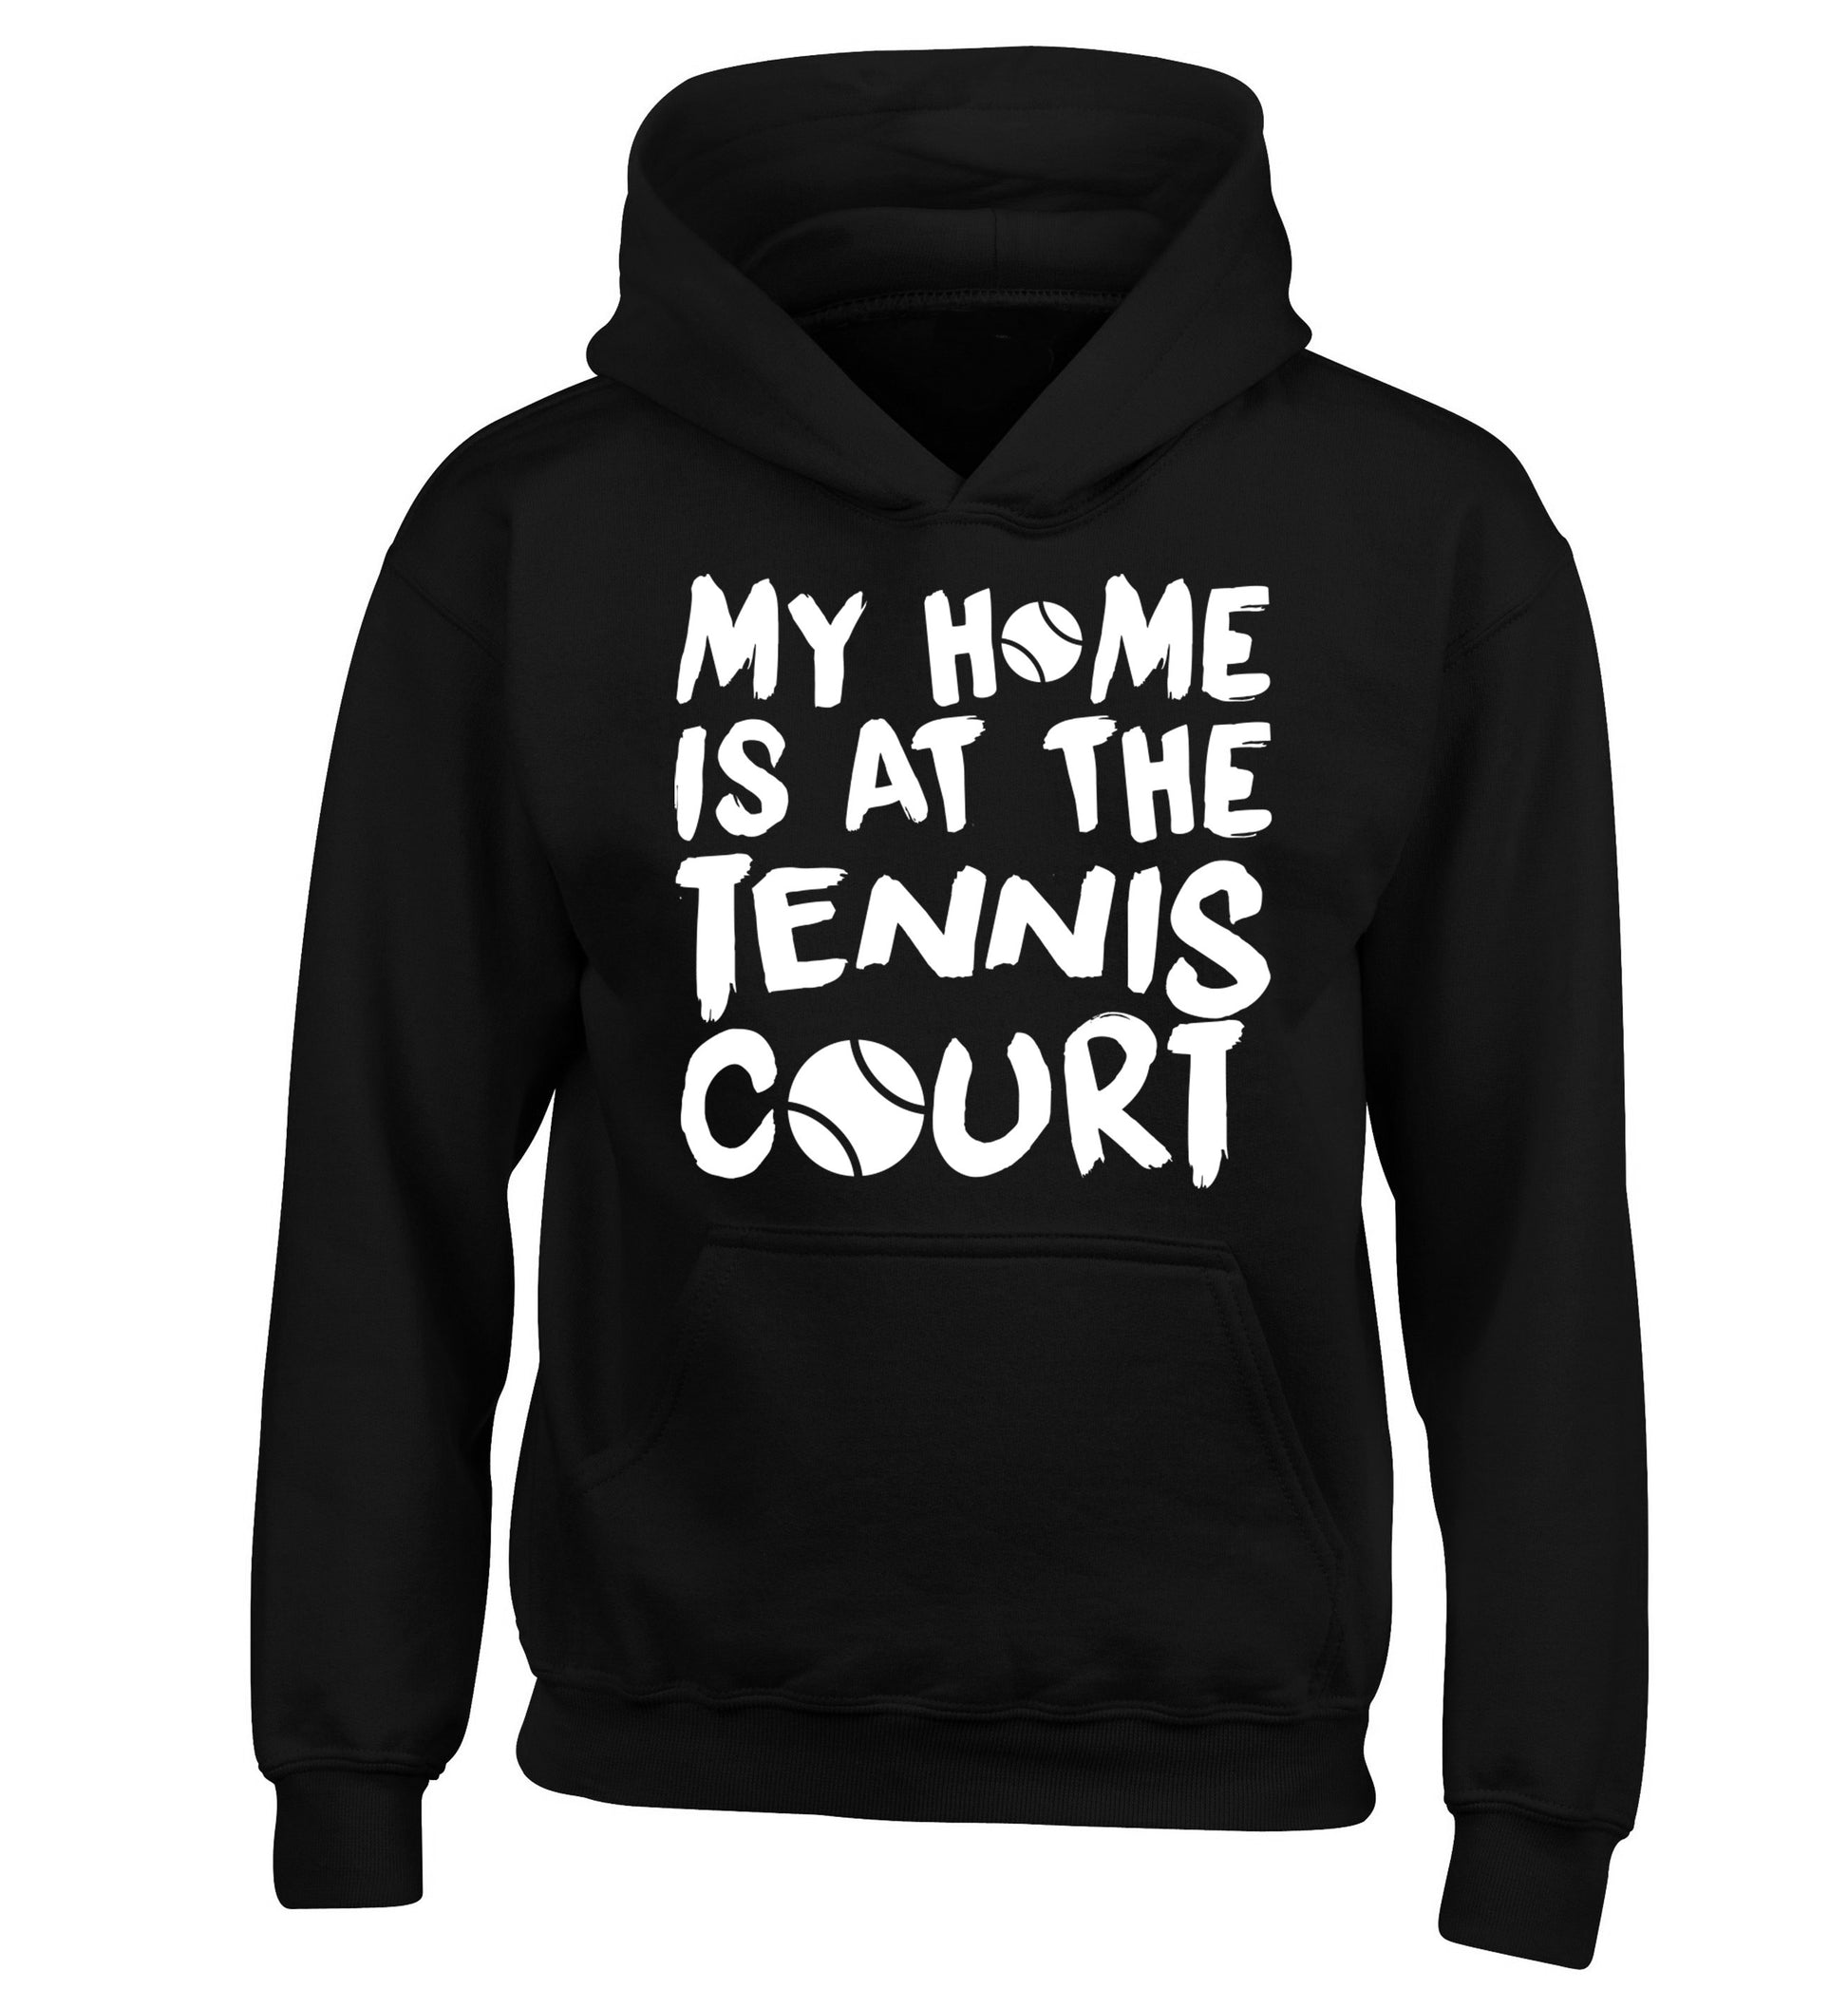 My home is at the tennis court children's black hoodie 12-14 Years